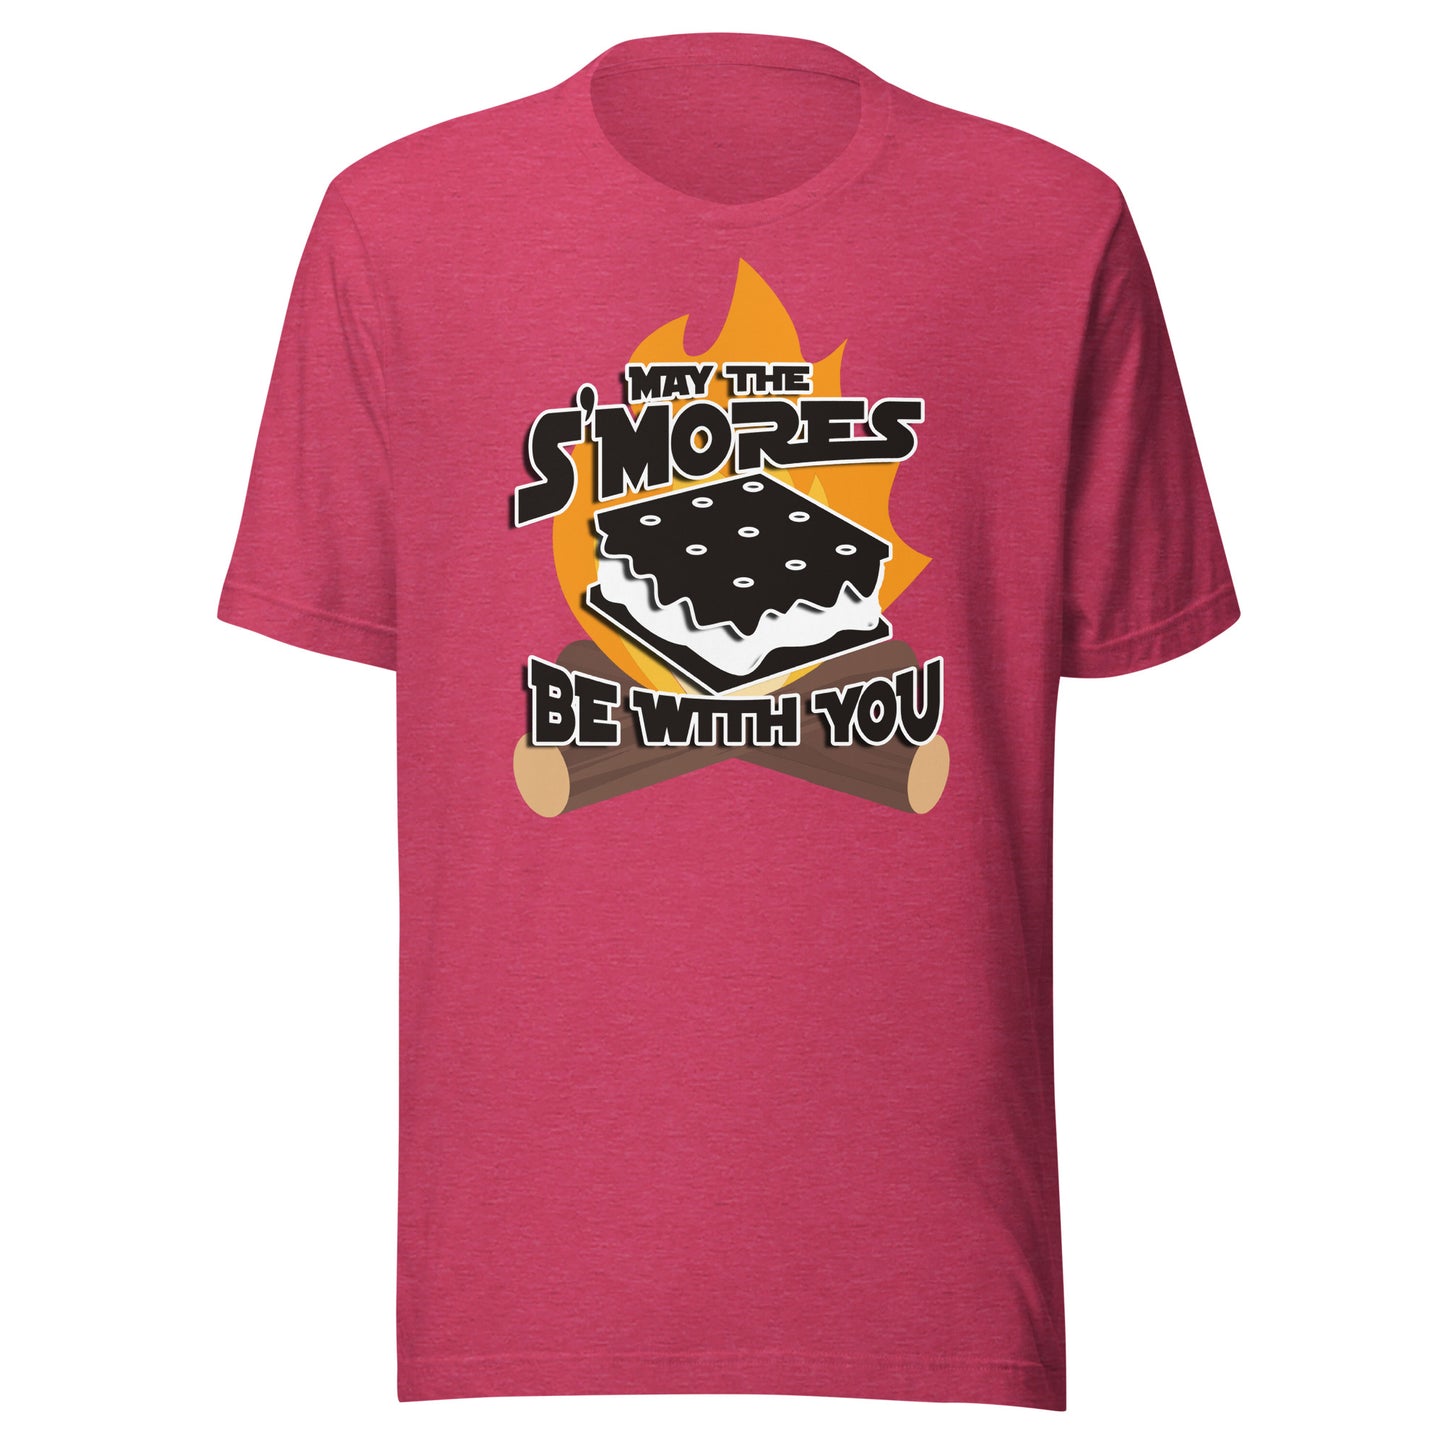 May the S'mores be with you funny camping smores campfire T Shirt